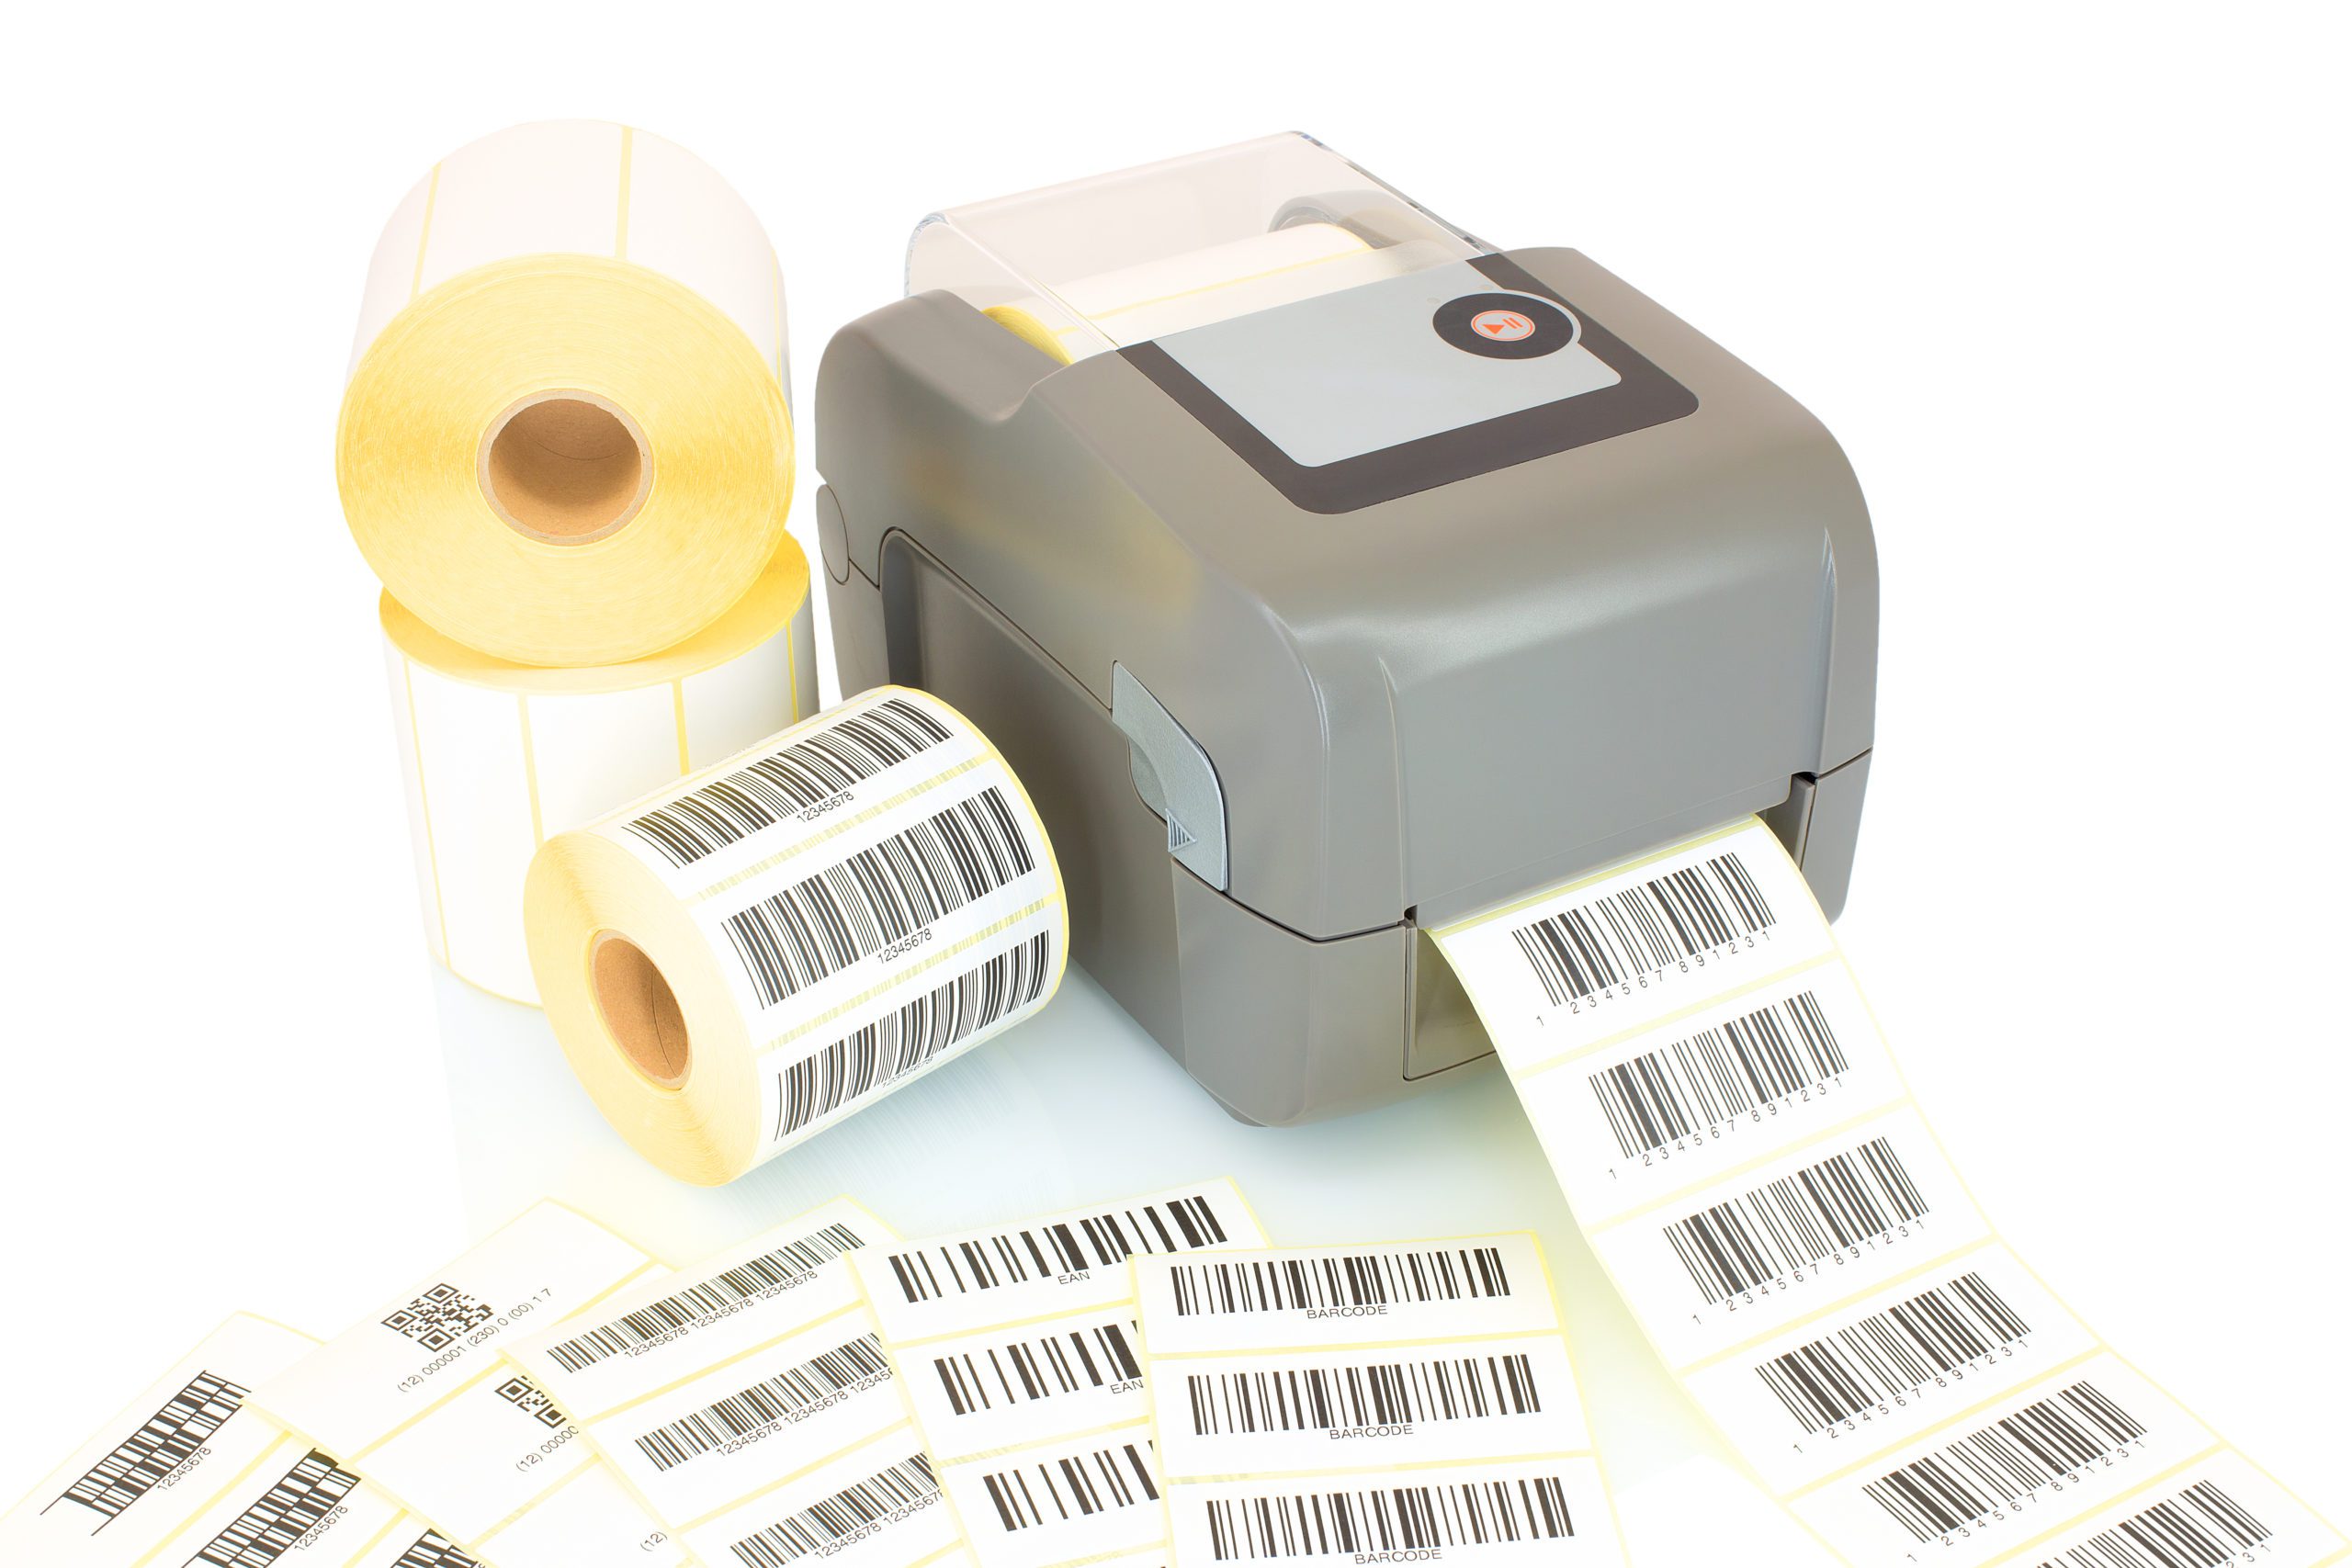 Thermal Transfer Printing with the right Thermal Transfer Ribbon on your substrate